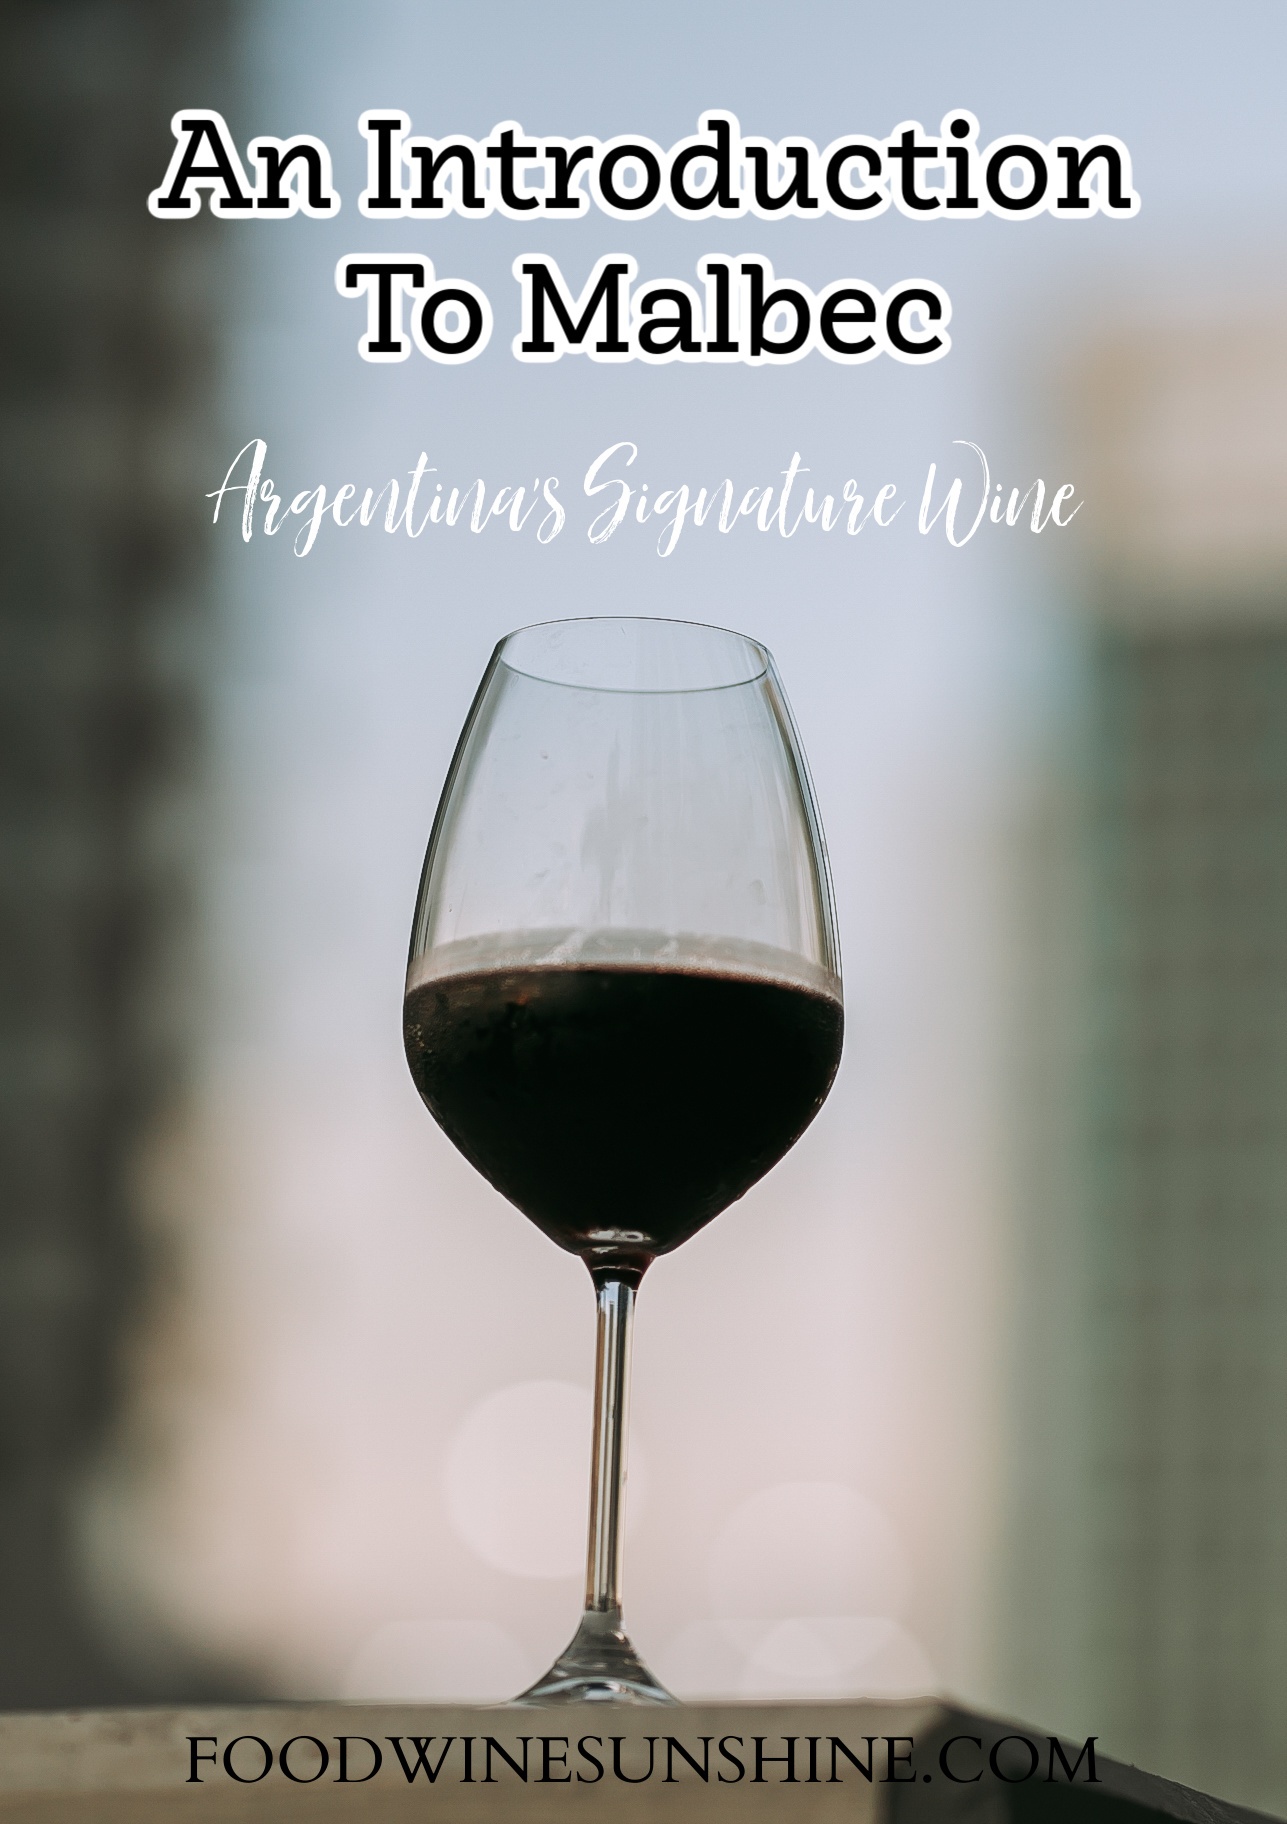 Introduction To Malbec